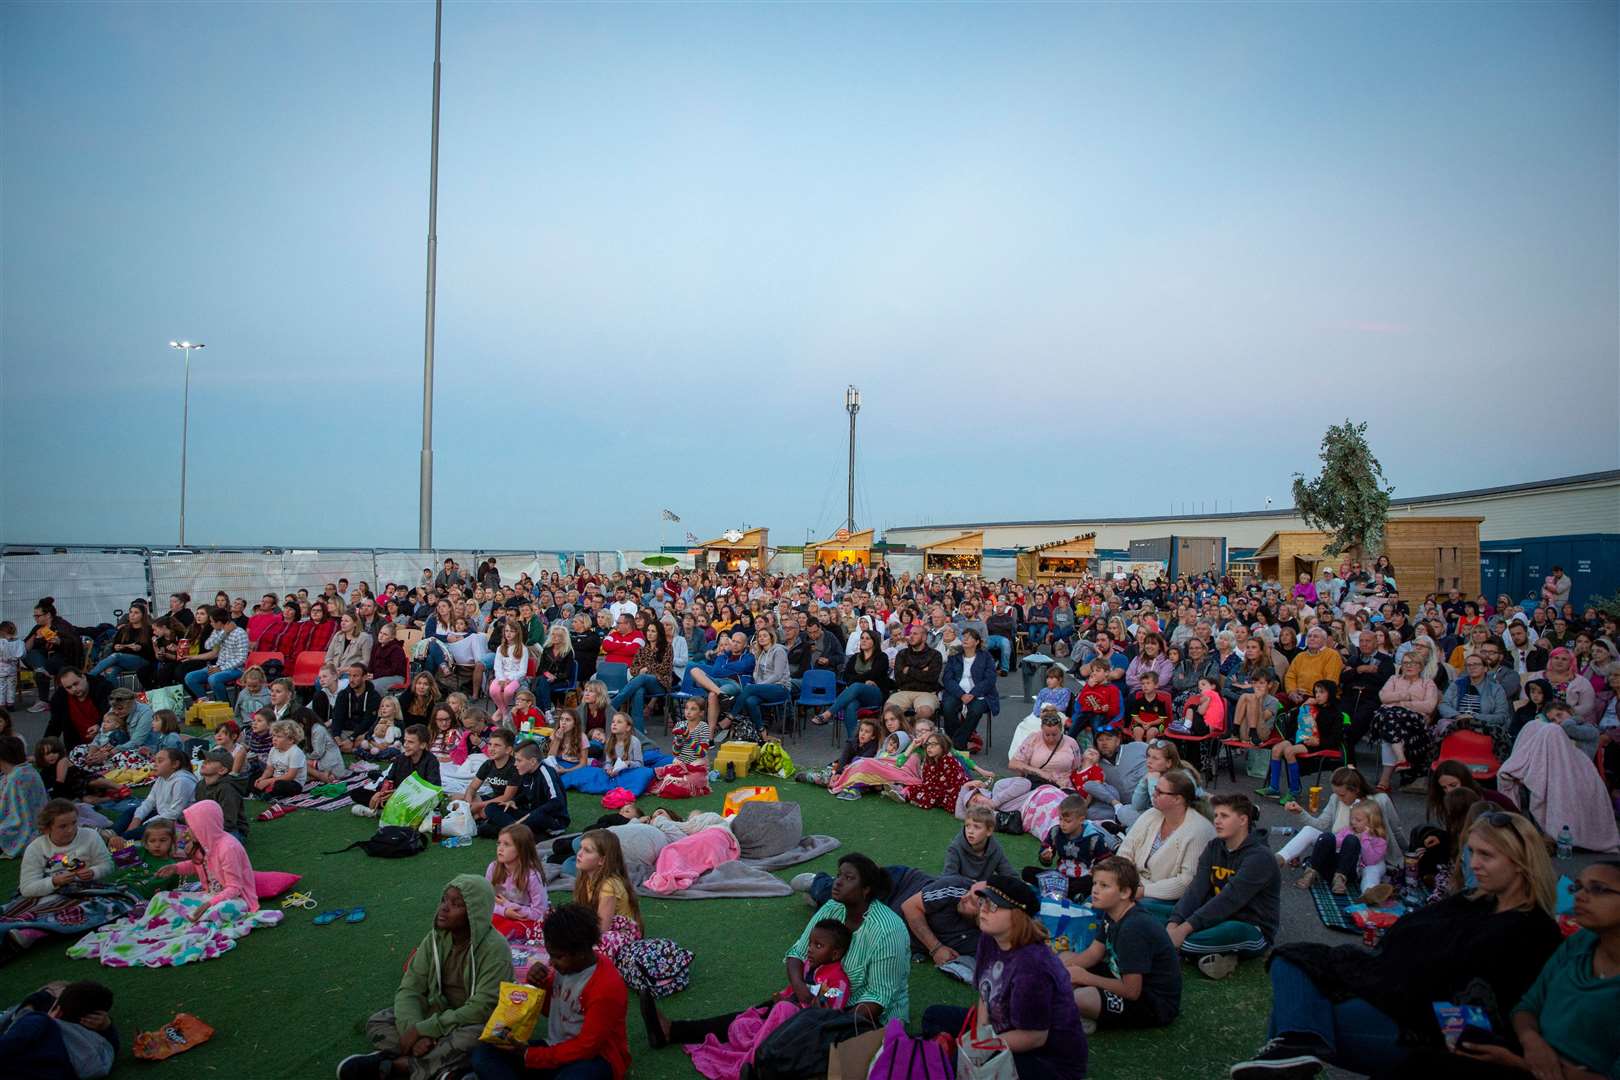 The Harbour Screen was introduced in 2018. Pictured: Film fans watching The Greatest Showman. Picture © Andy Aitchison